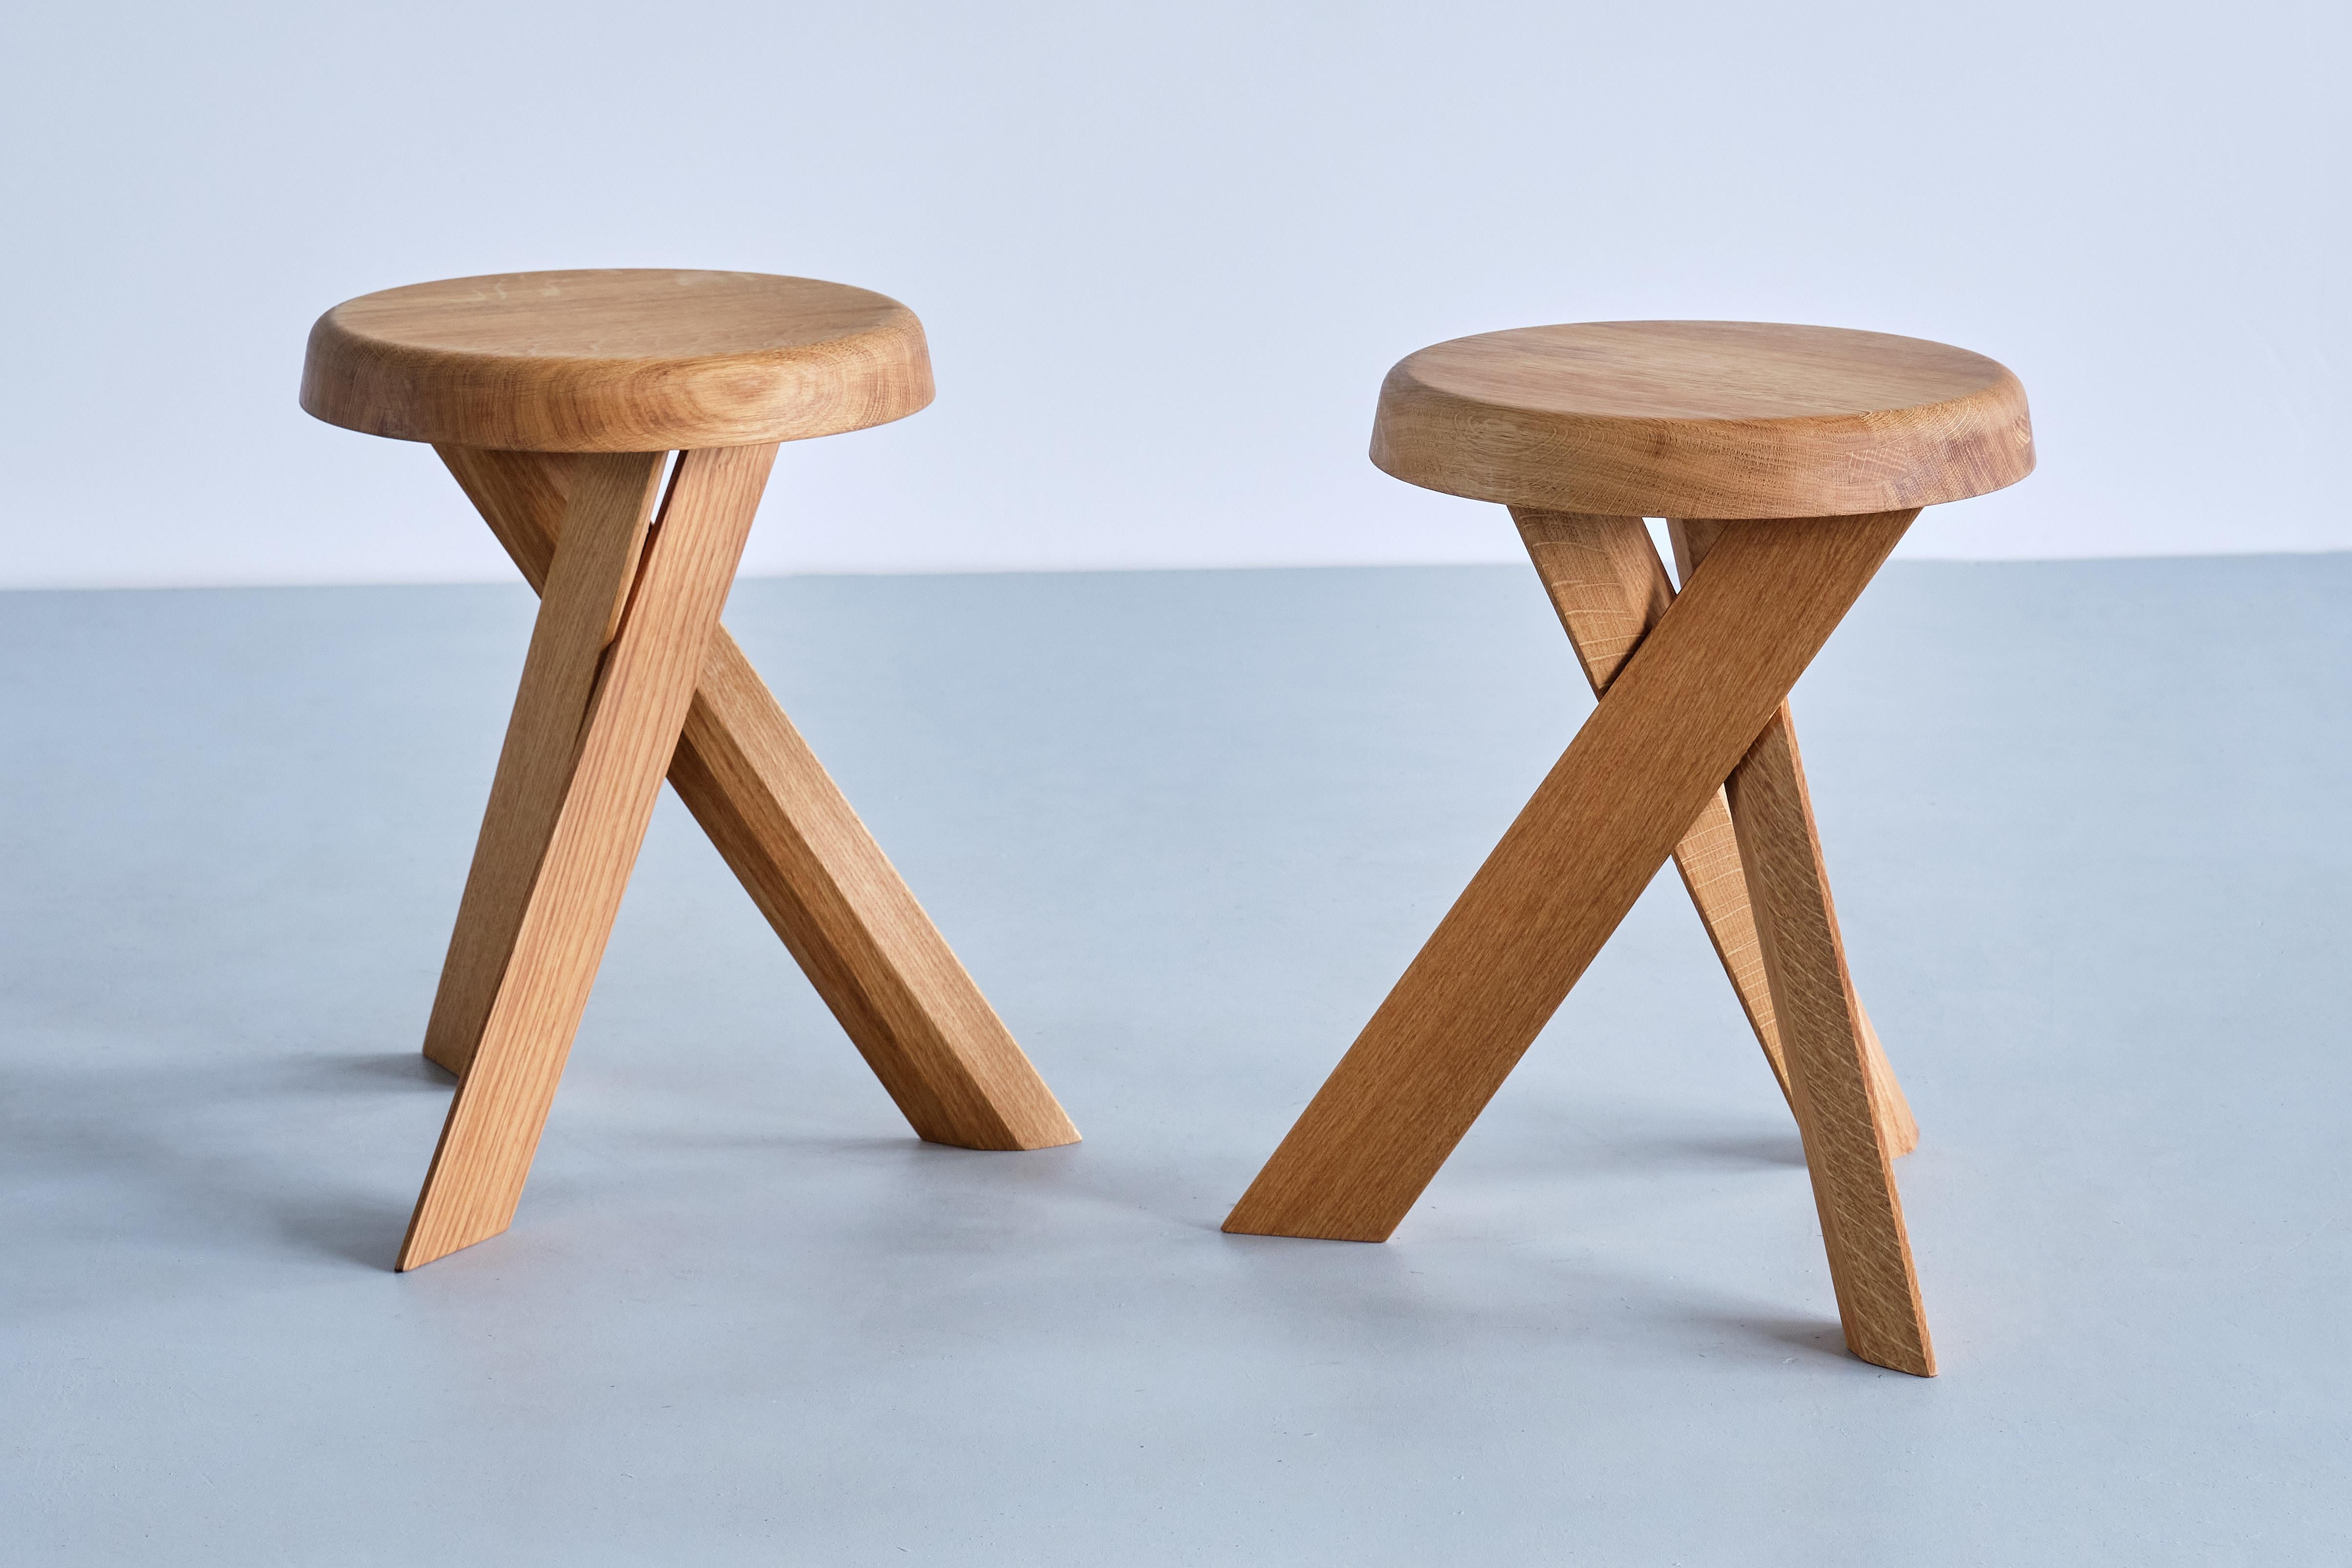 This striking three-legged stool is the model S31 designed by Pierre Chapo in 1974. The cross legged base and round seat are in solid oak wood. This stool also could function as a small side table.  
This listing is for the S31A (lower) version in